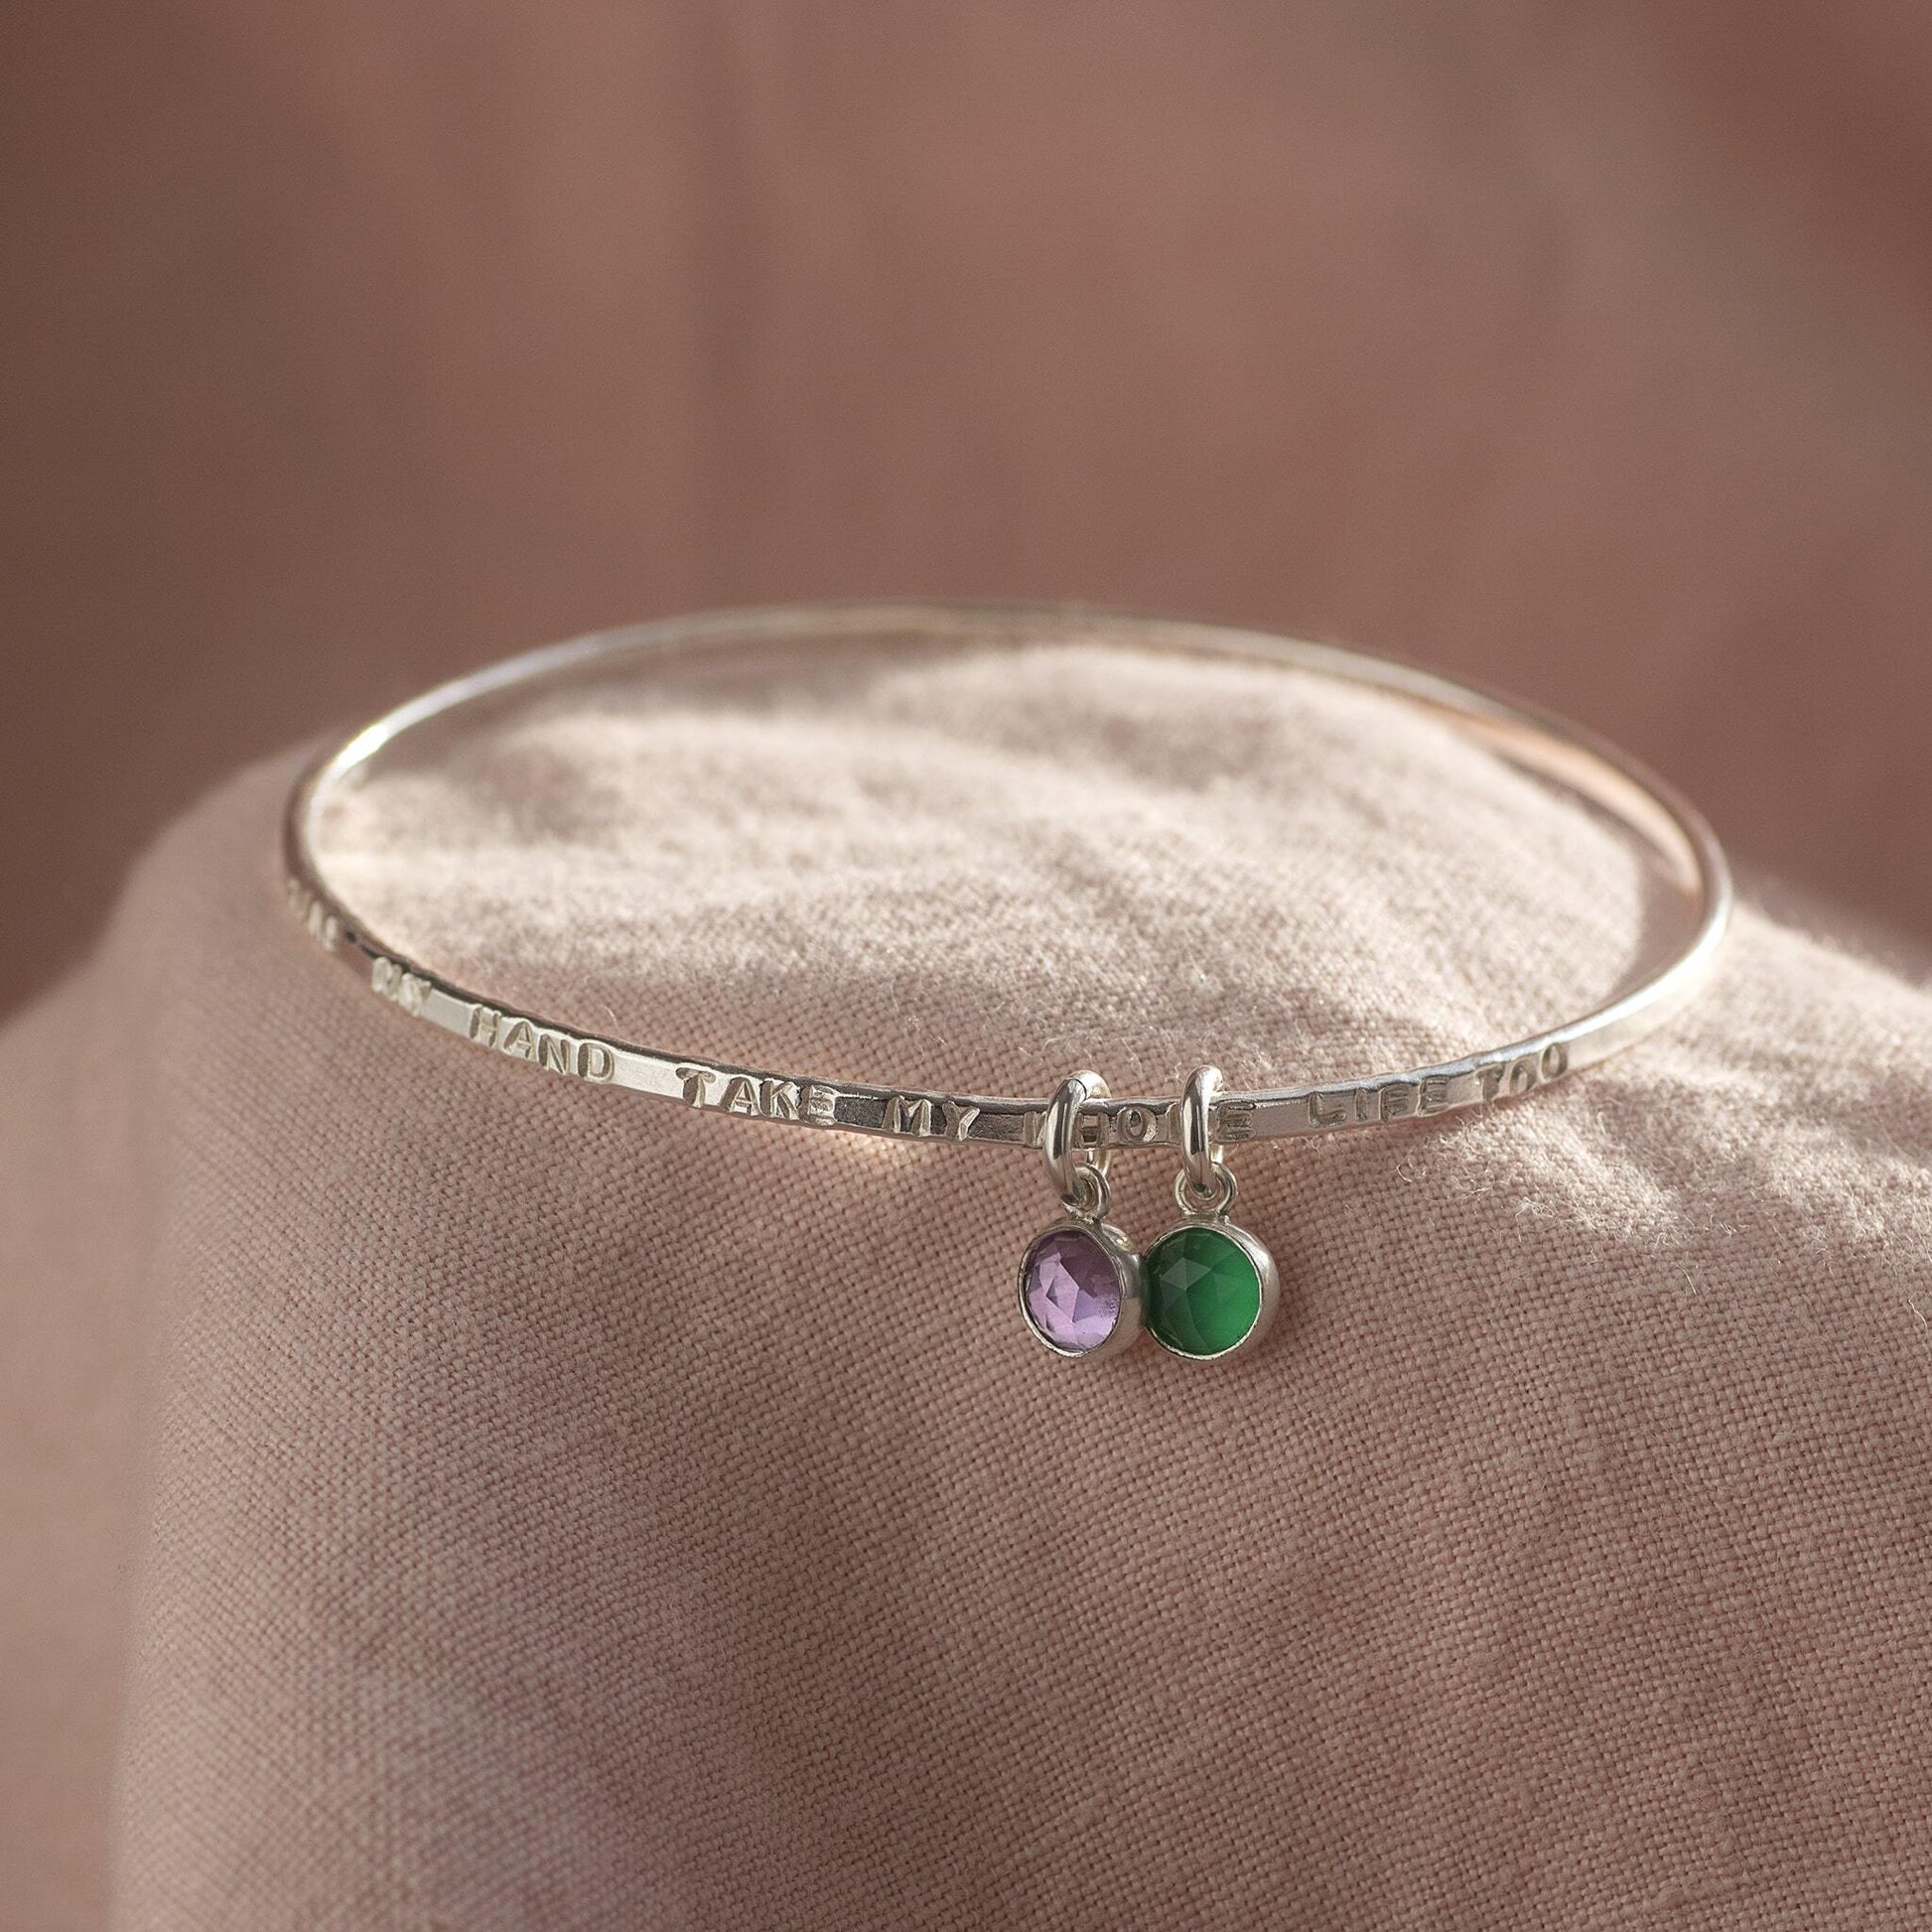 Personalised Bangle - Birthstones for Loved Ones - Hand Stamped Media